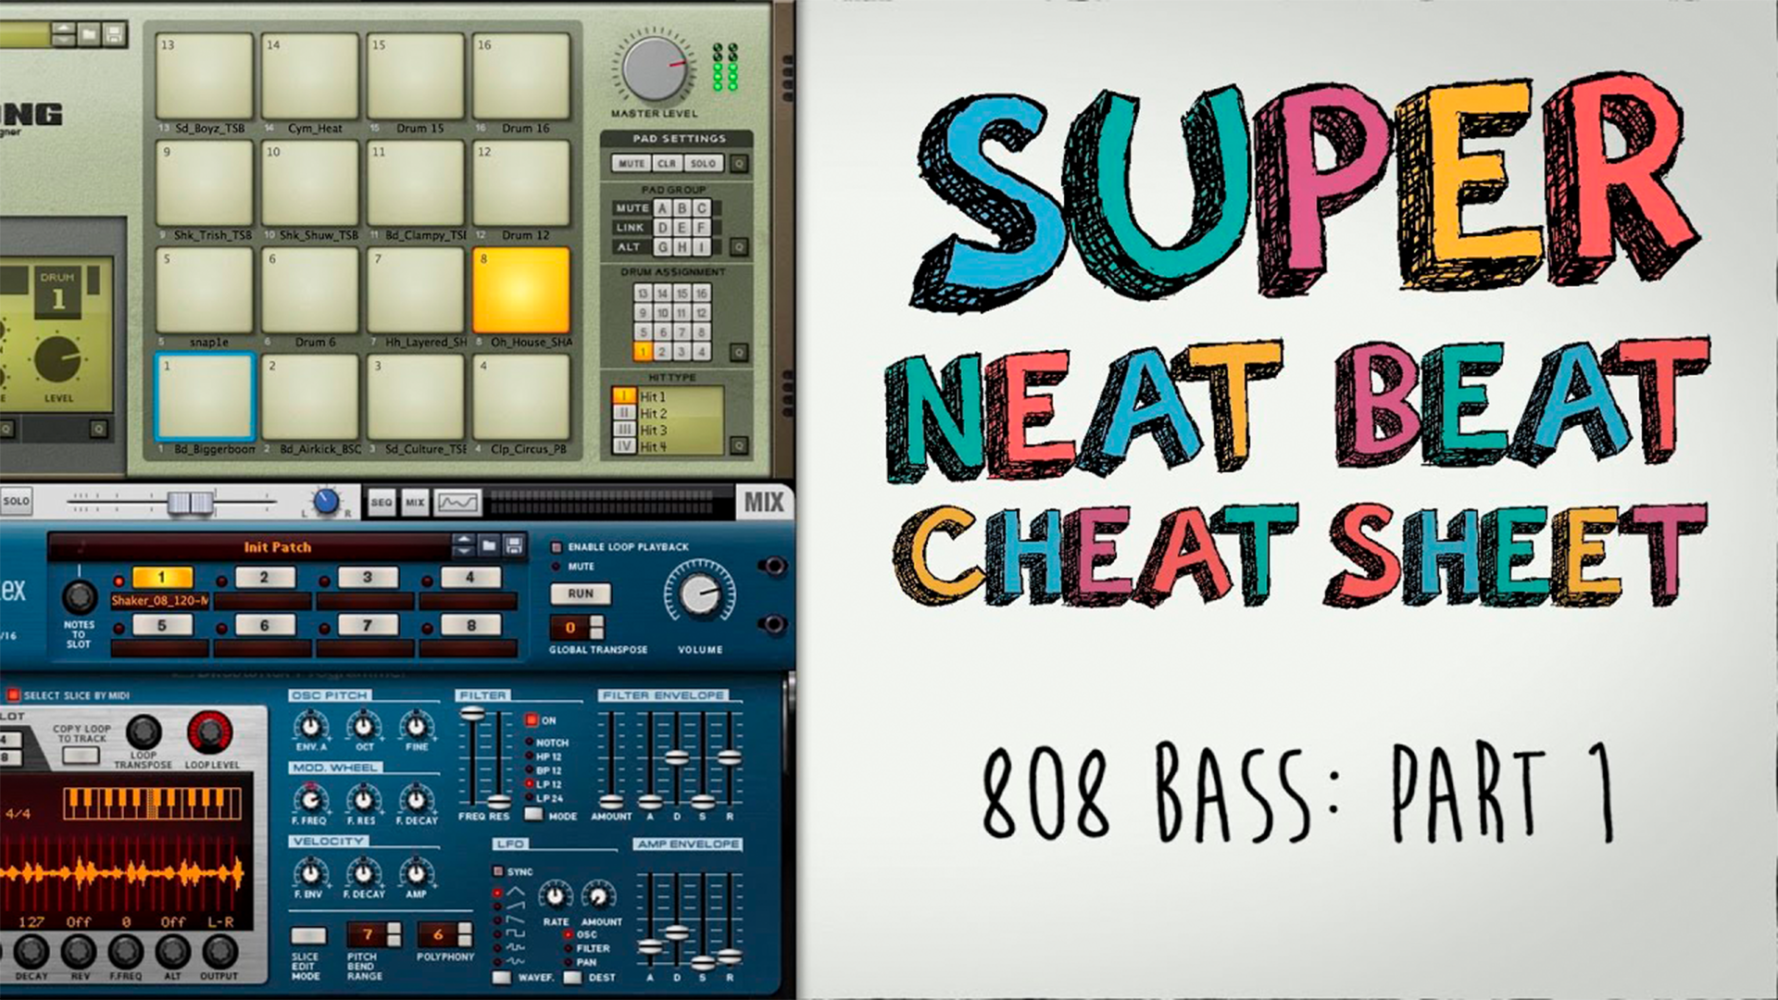 Tutorial: How to Make 808 Bass Lines